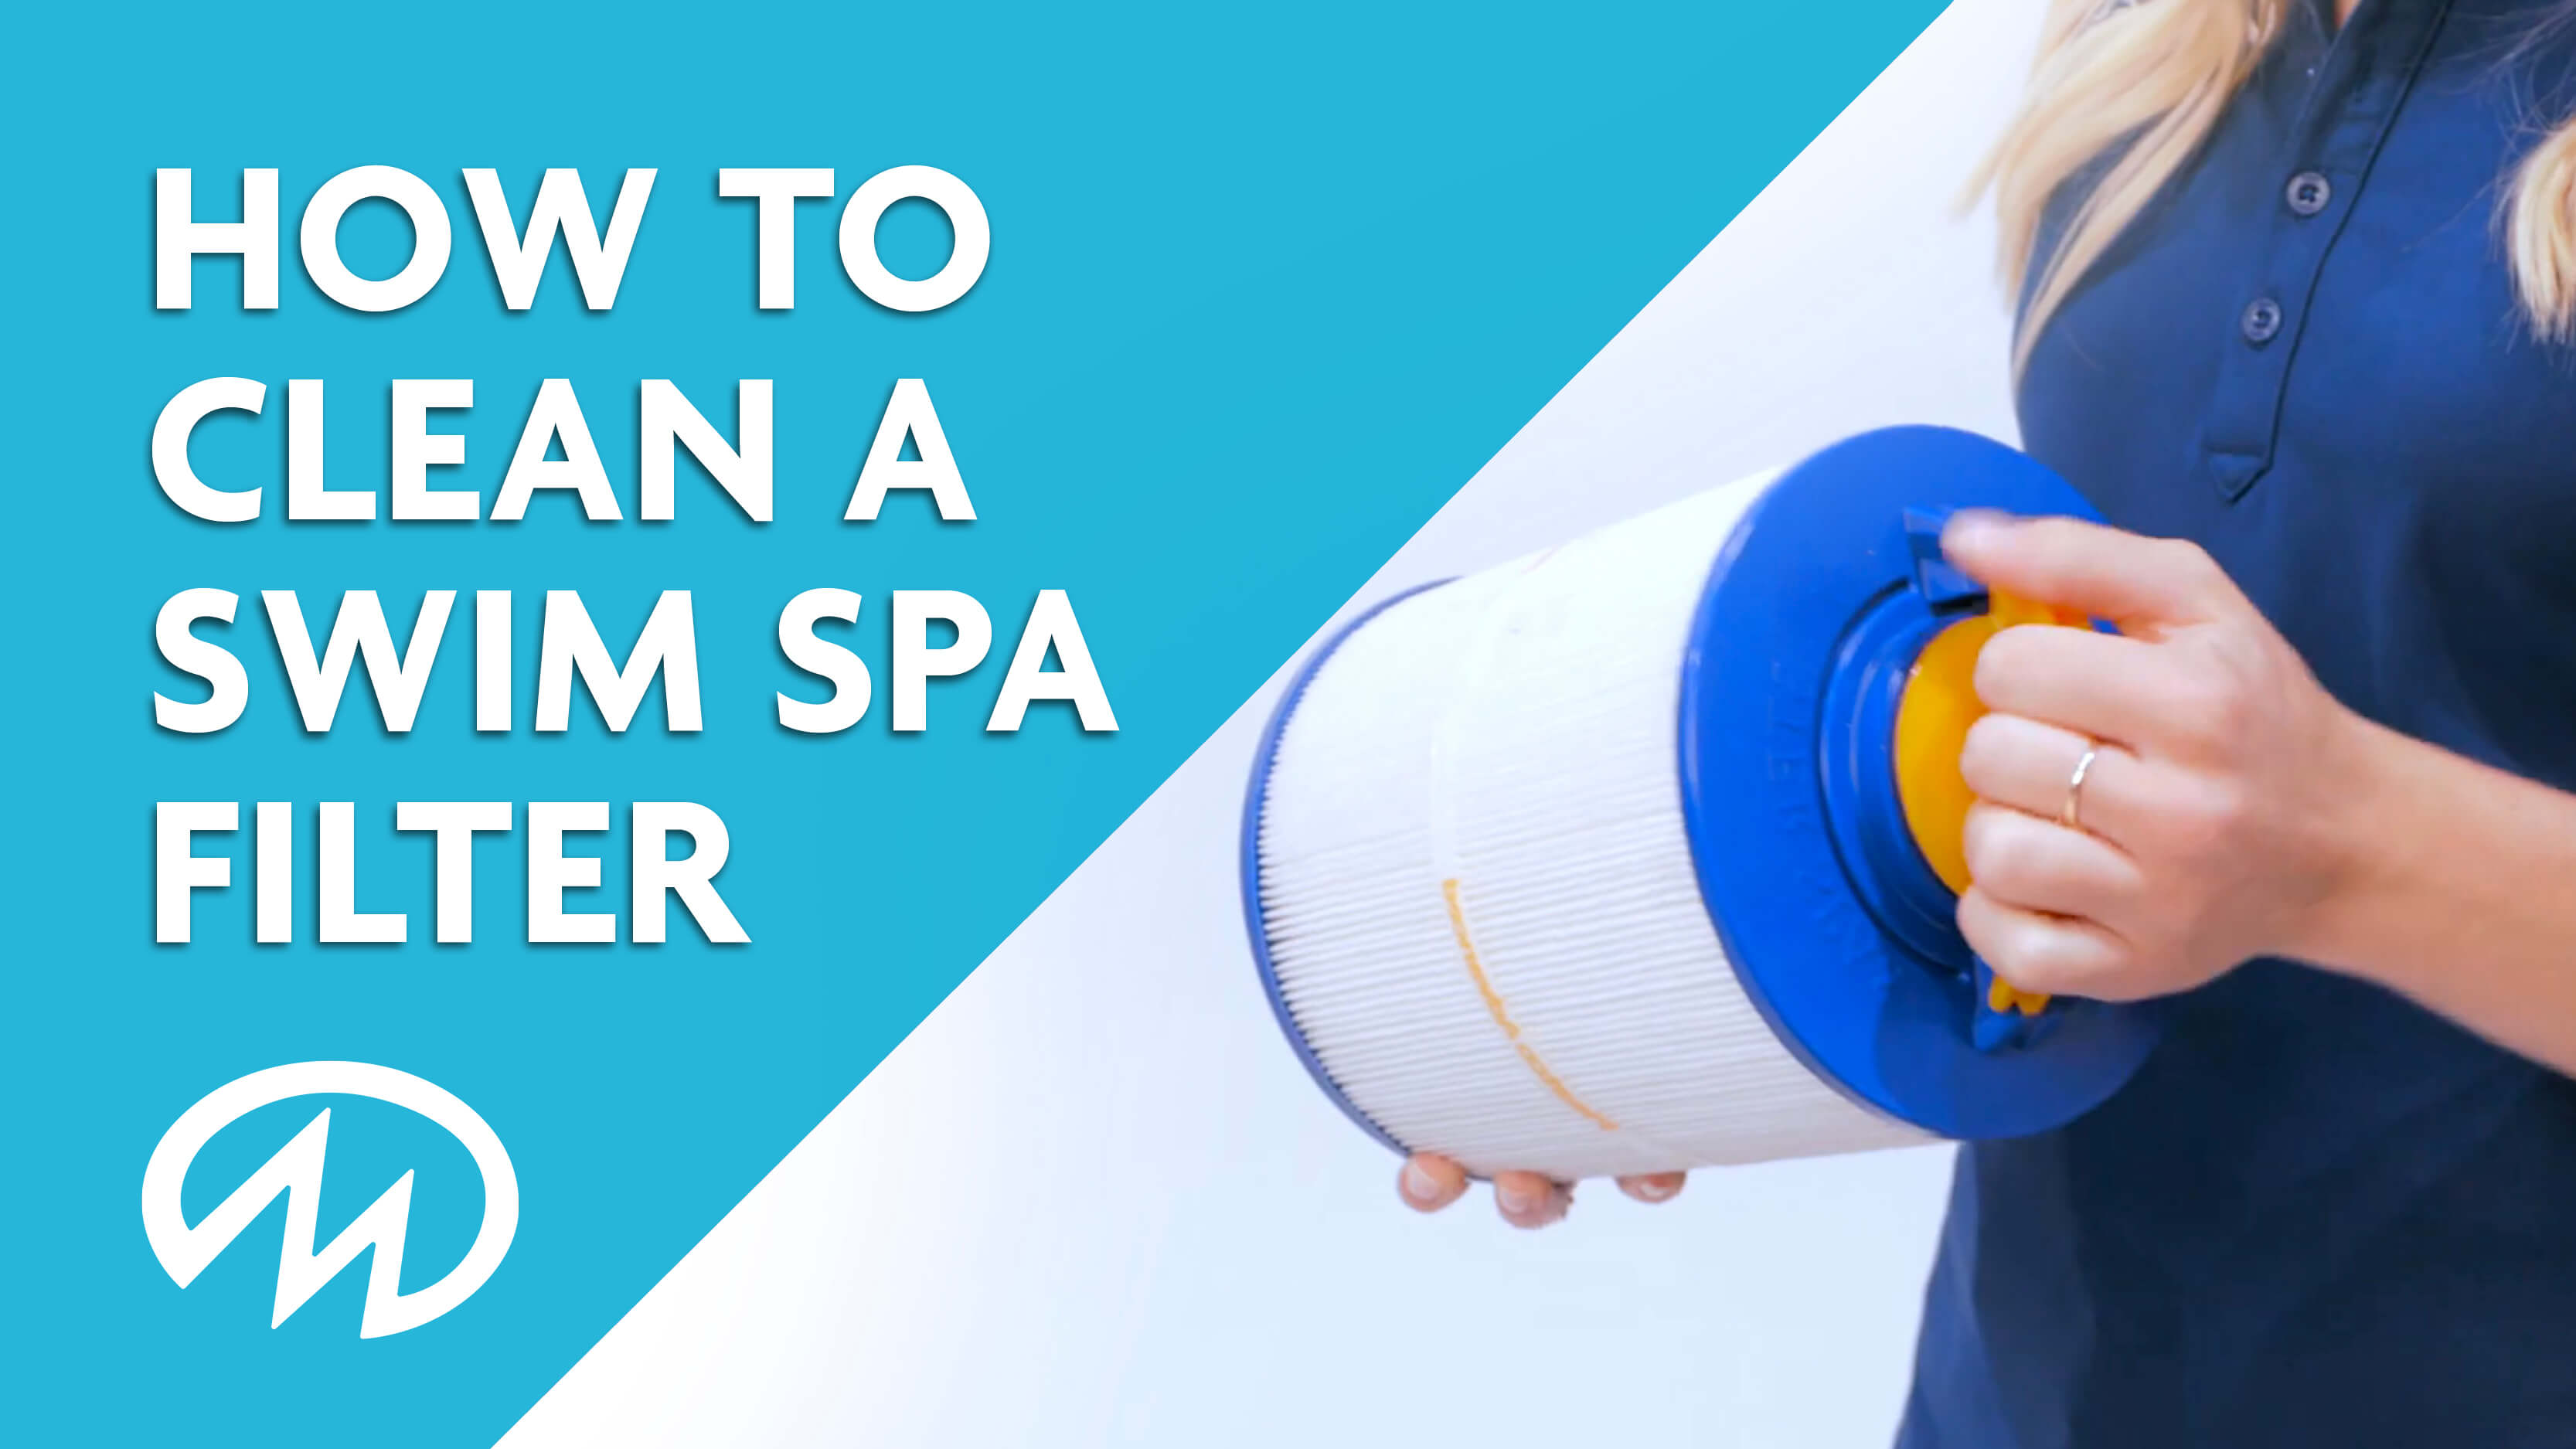 How to clean your swim spa filter